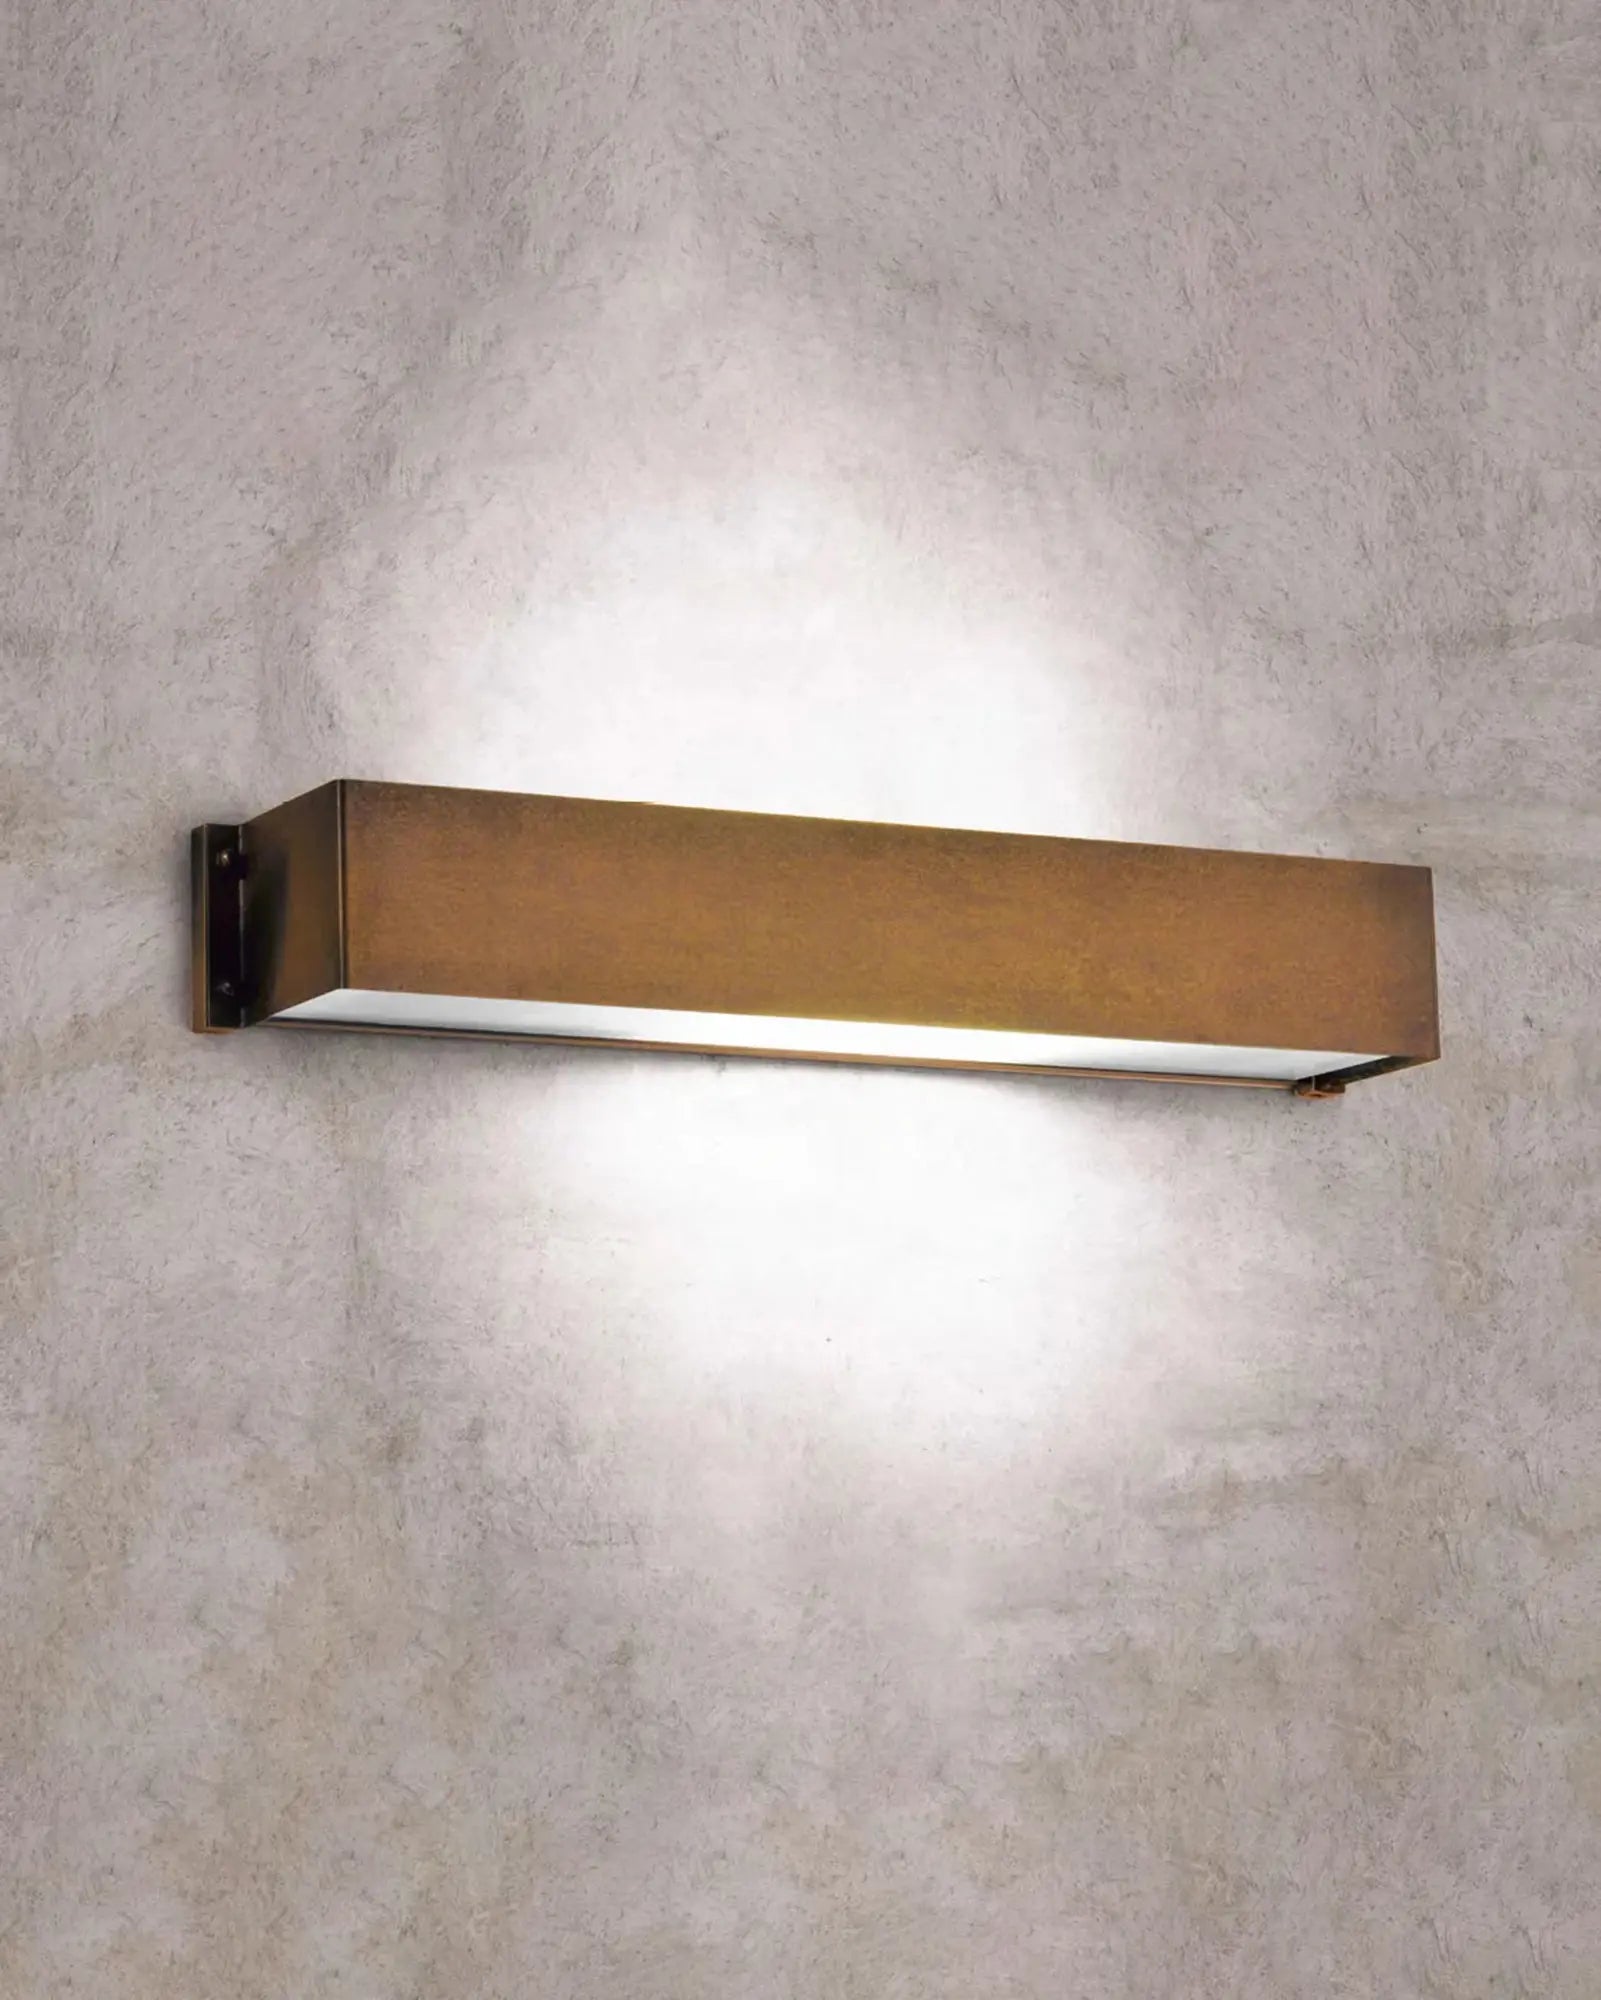 Allegro Rectangular Brass wall light made in Italy on concrete wall